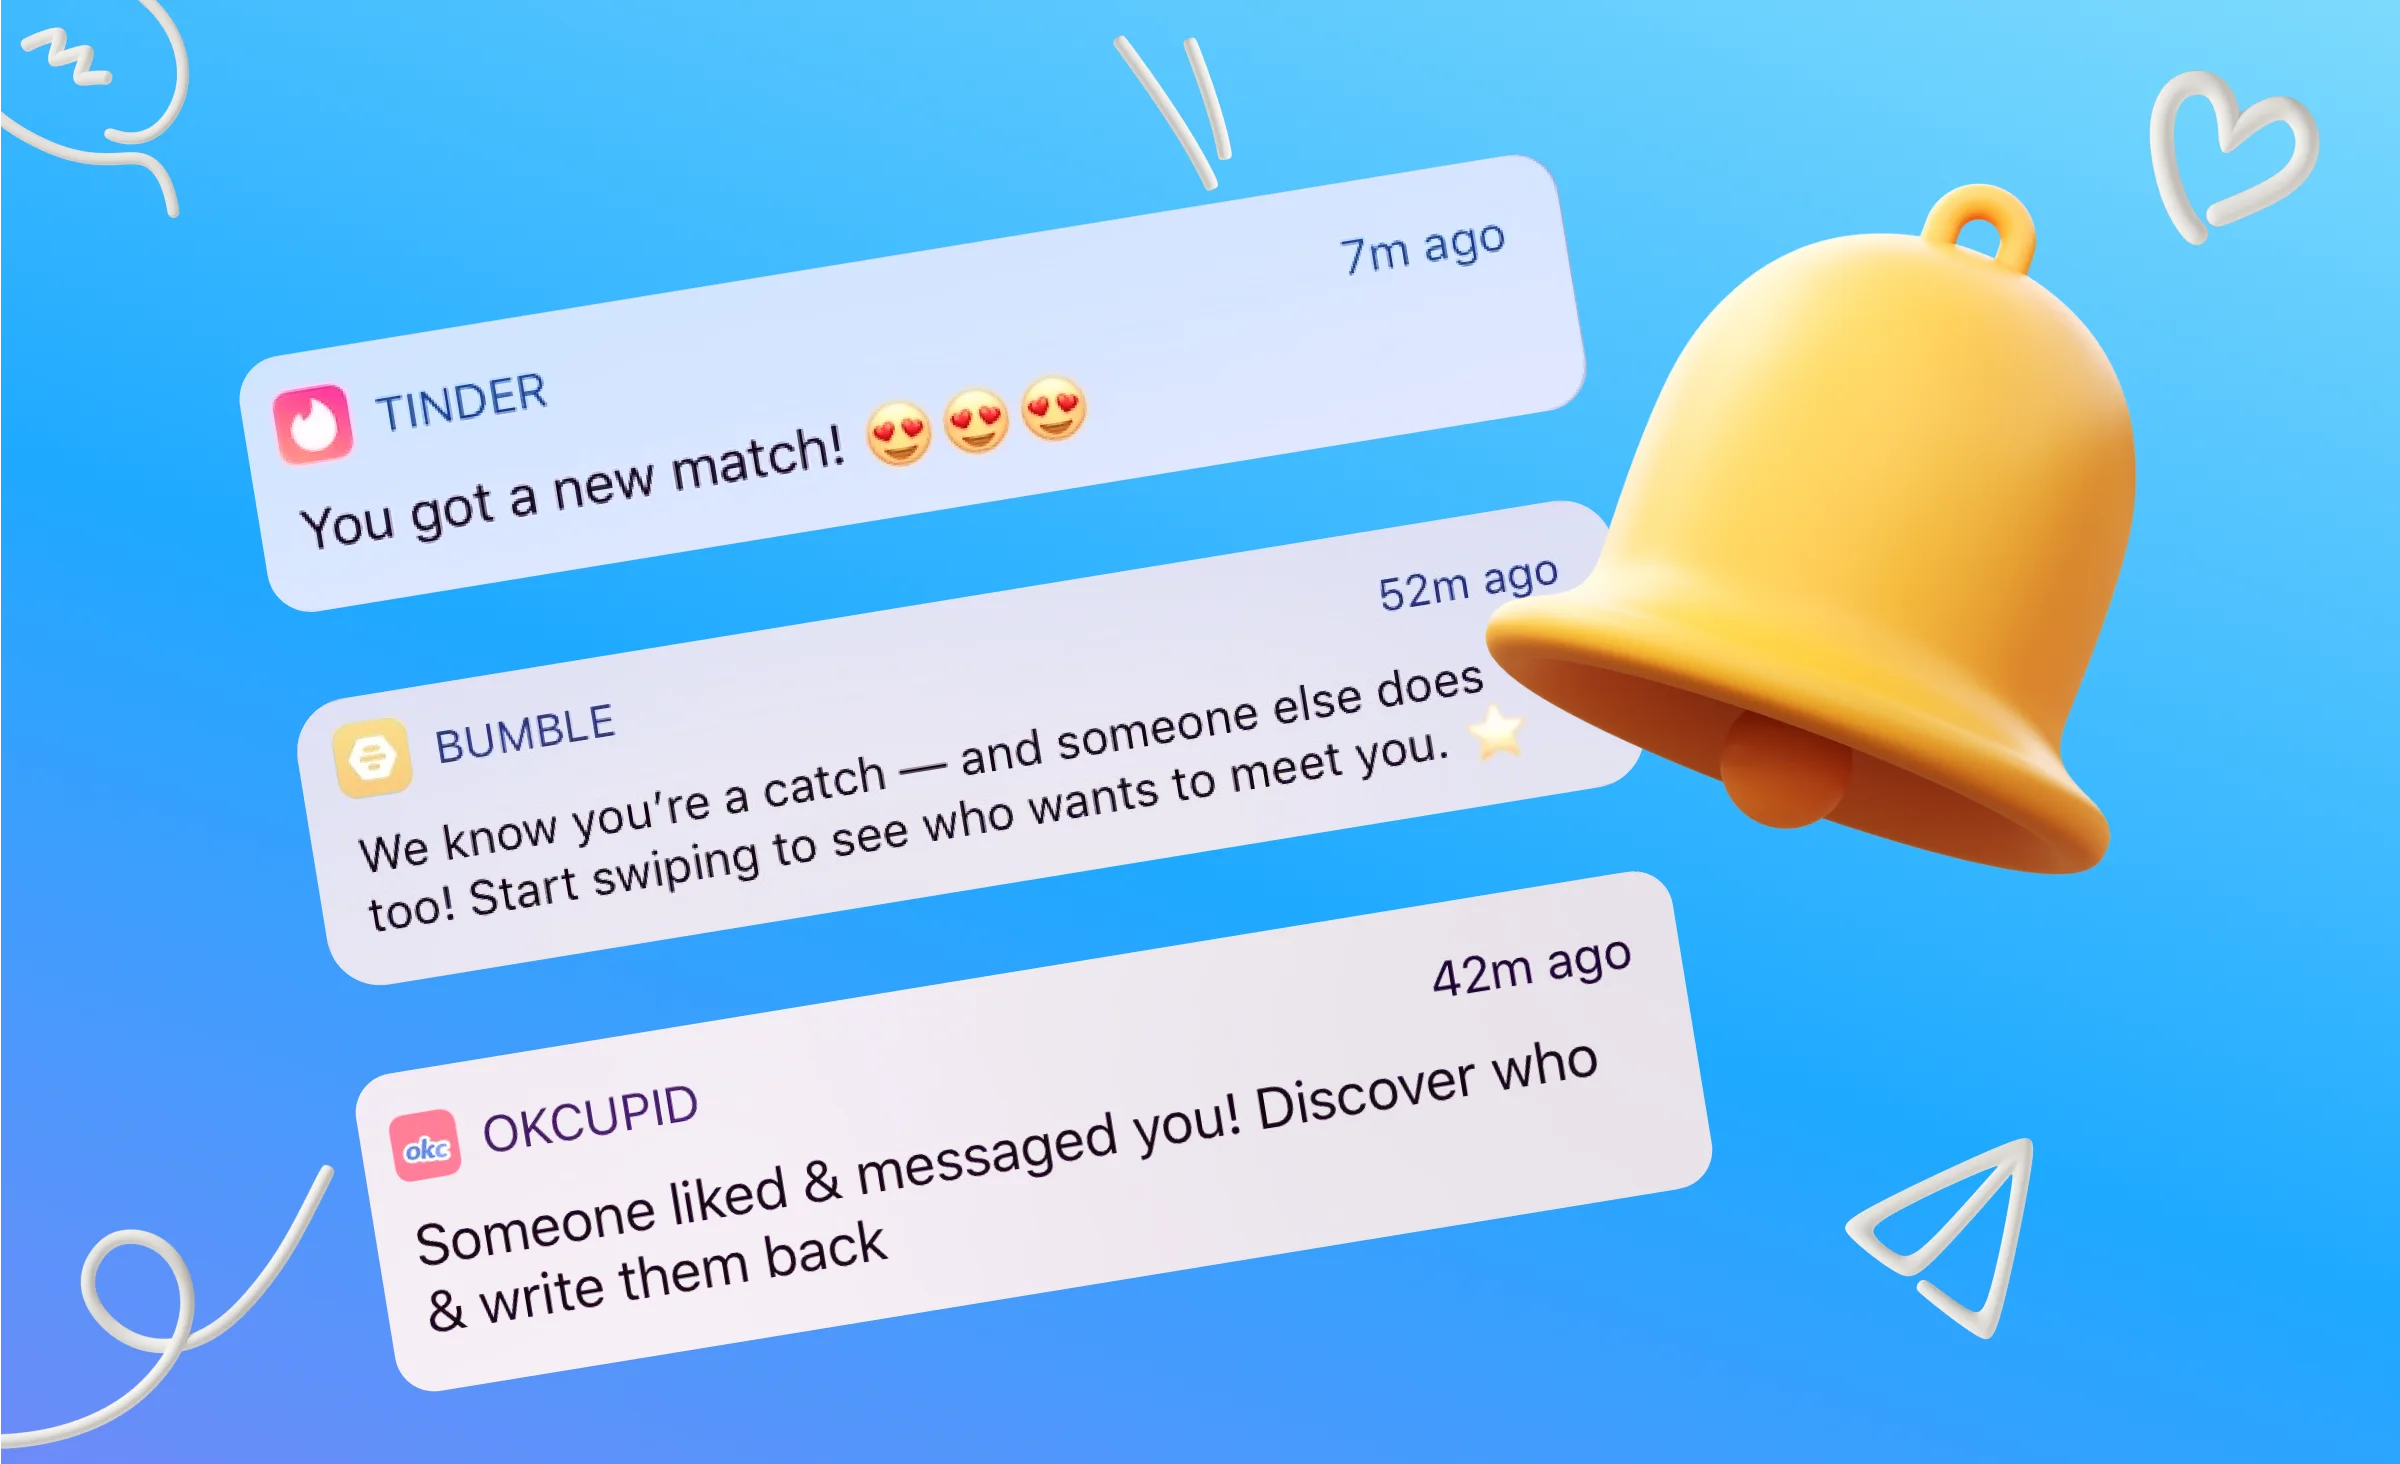 Push notifications can raise user retention. Consider setting them up while making a dating app